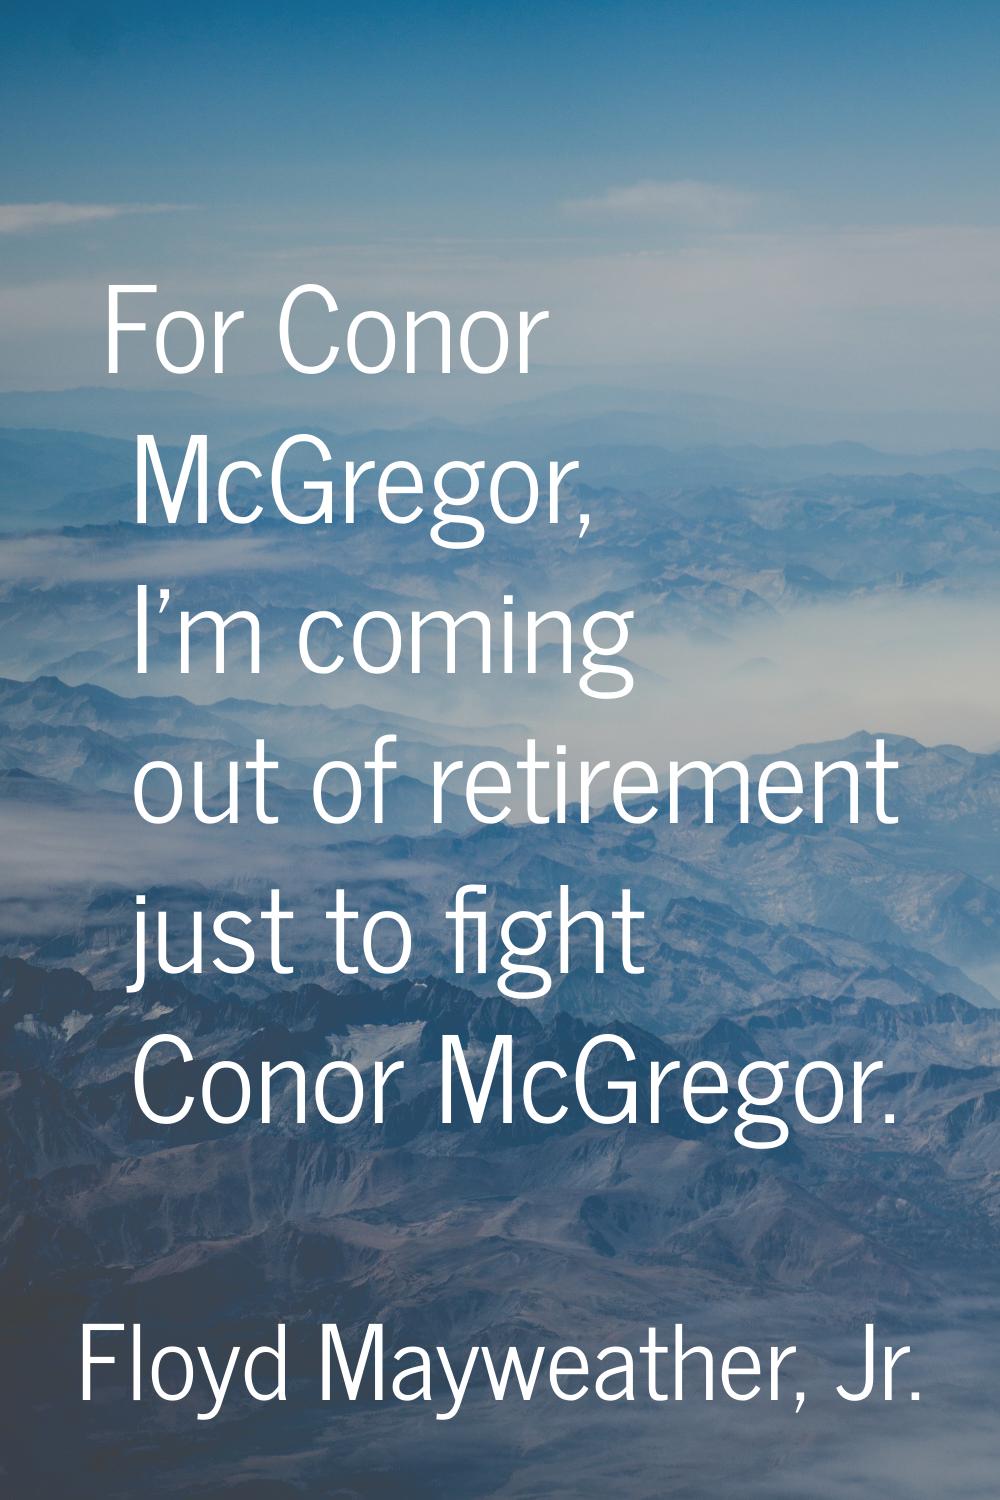 For Conor McGregor, I'm coming out of retirement just to fight Conor McGregor.